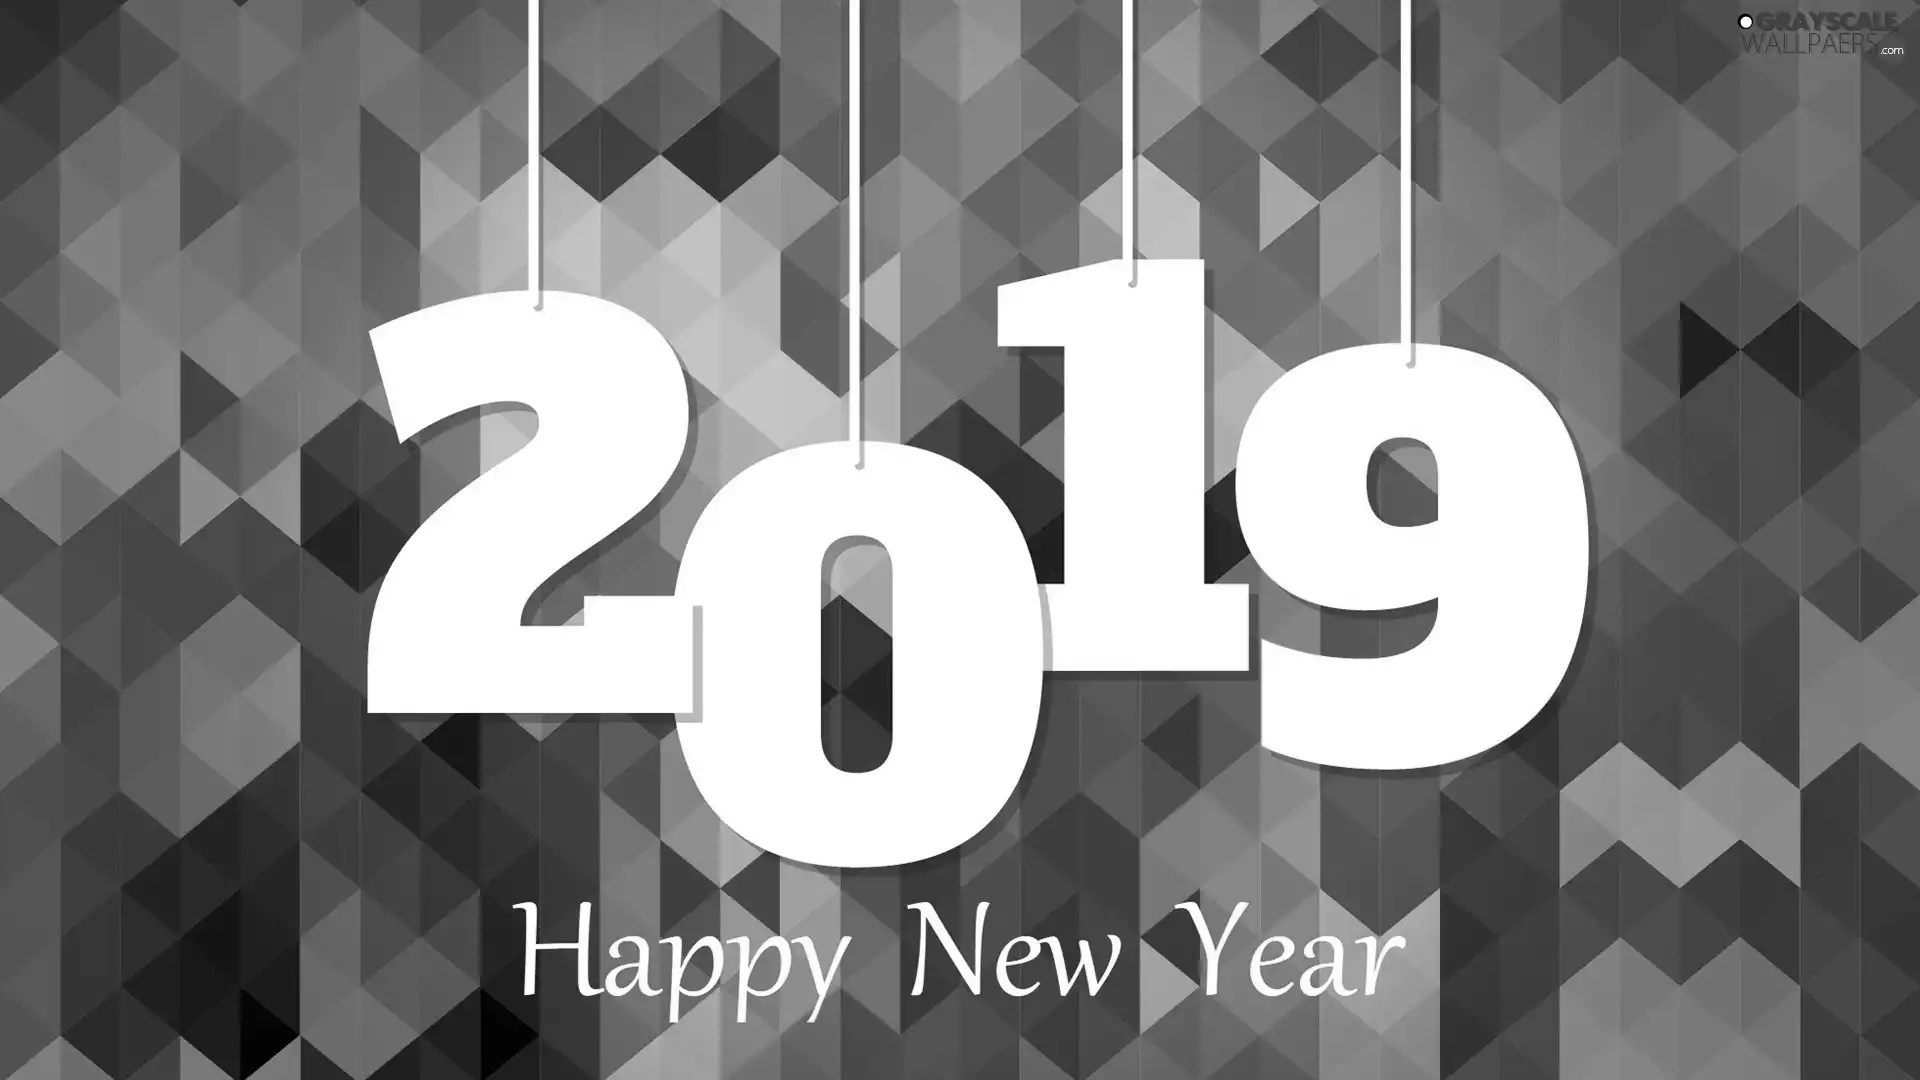 2019, Wishes, New Year